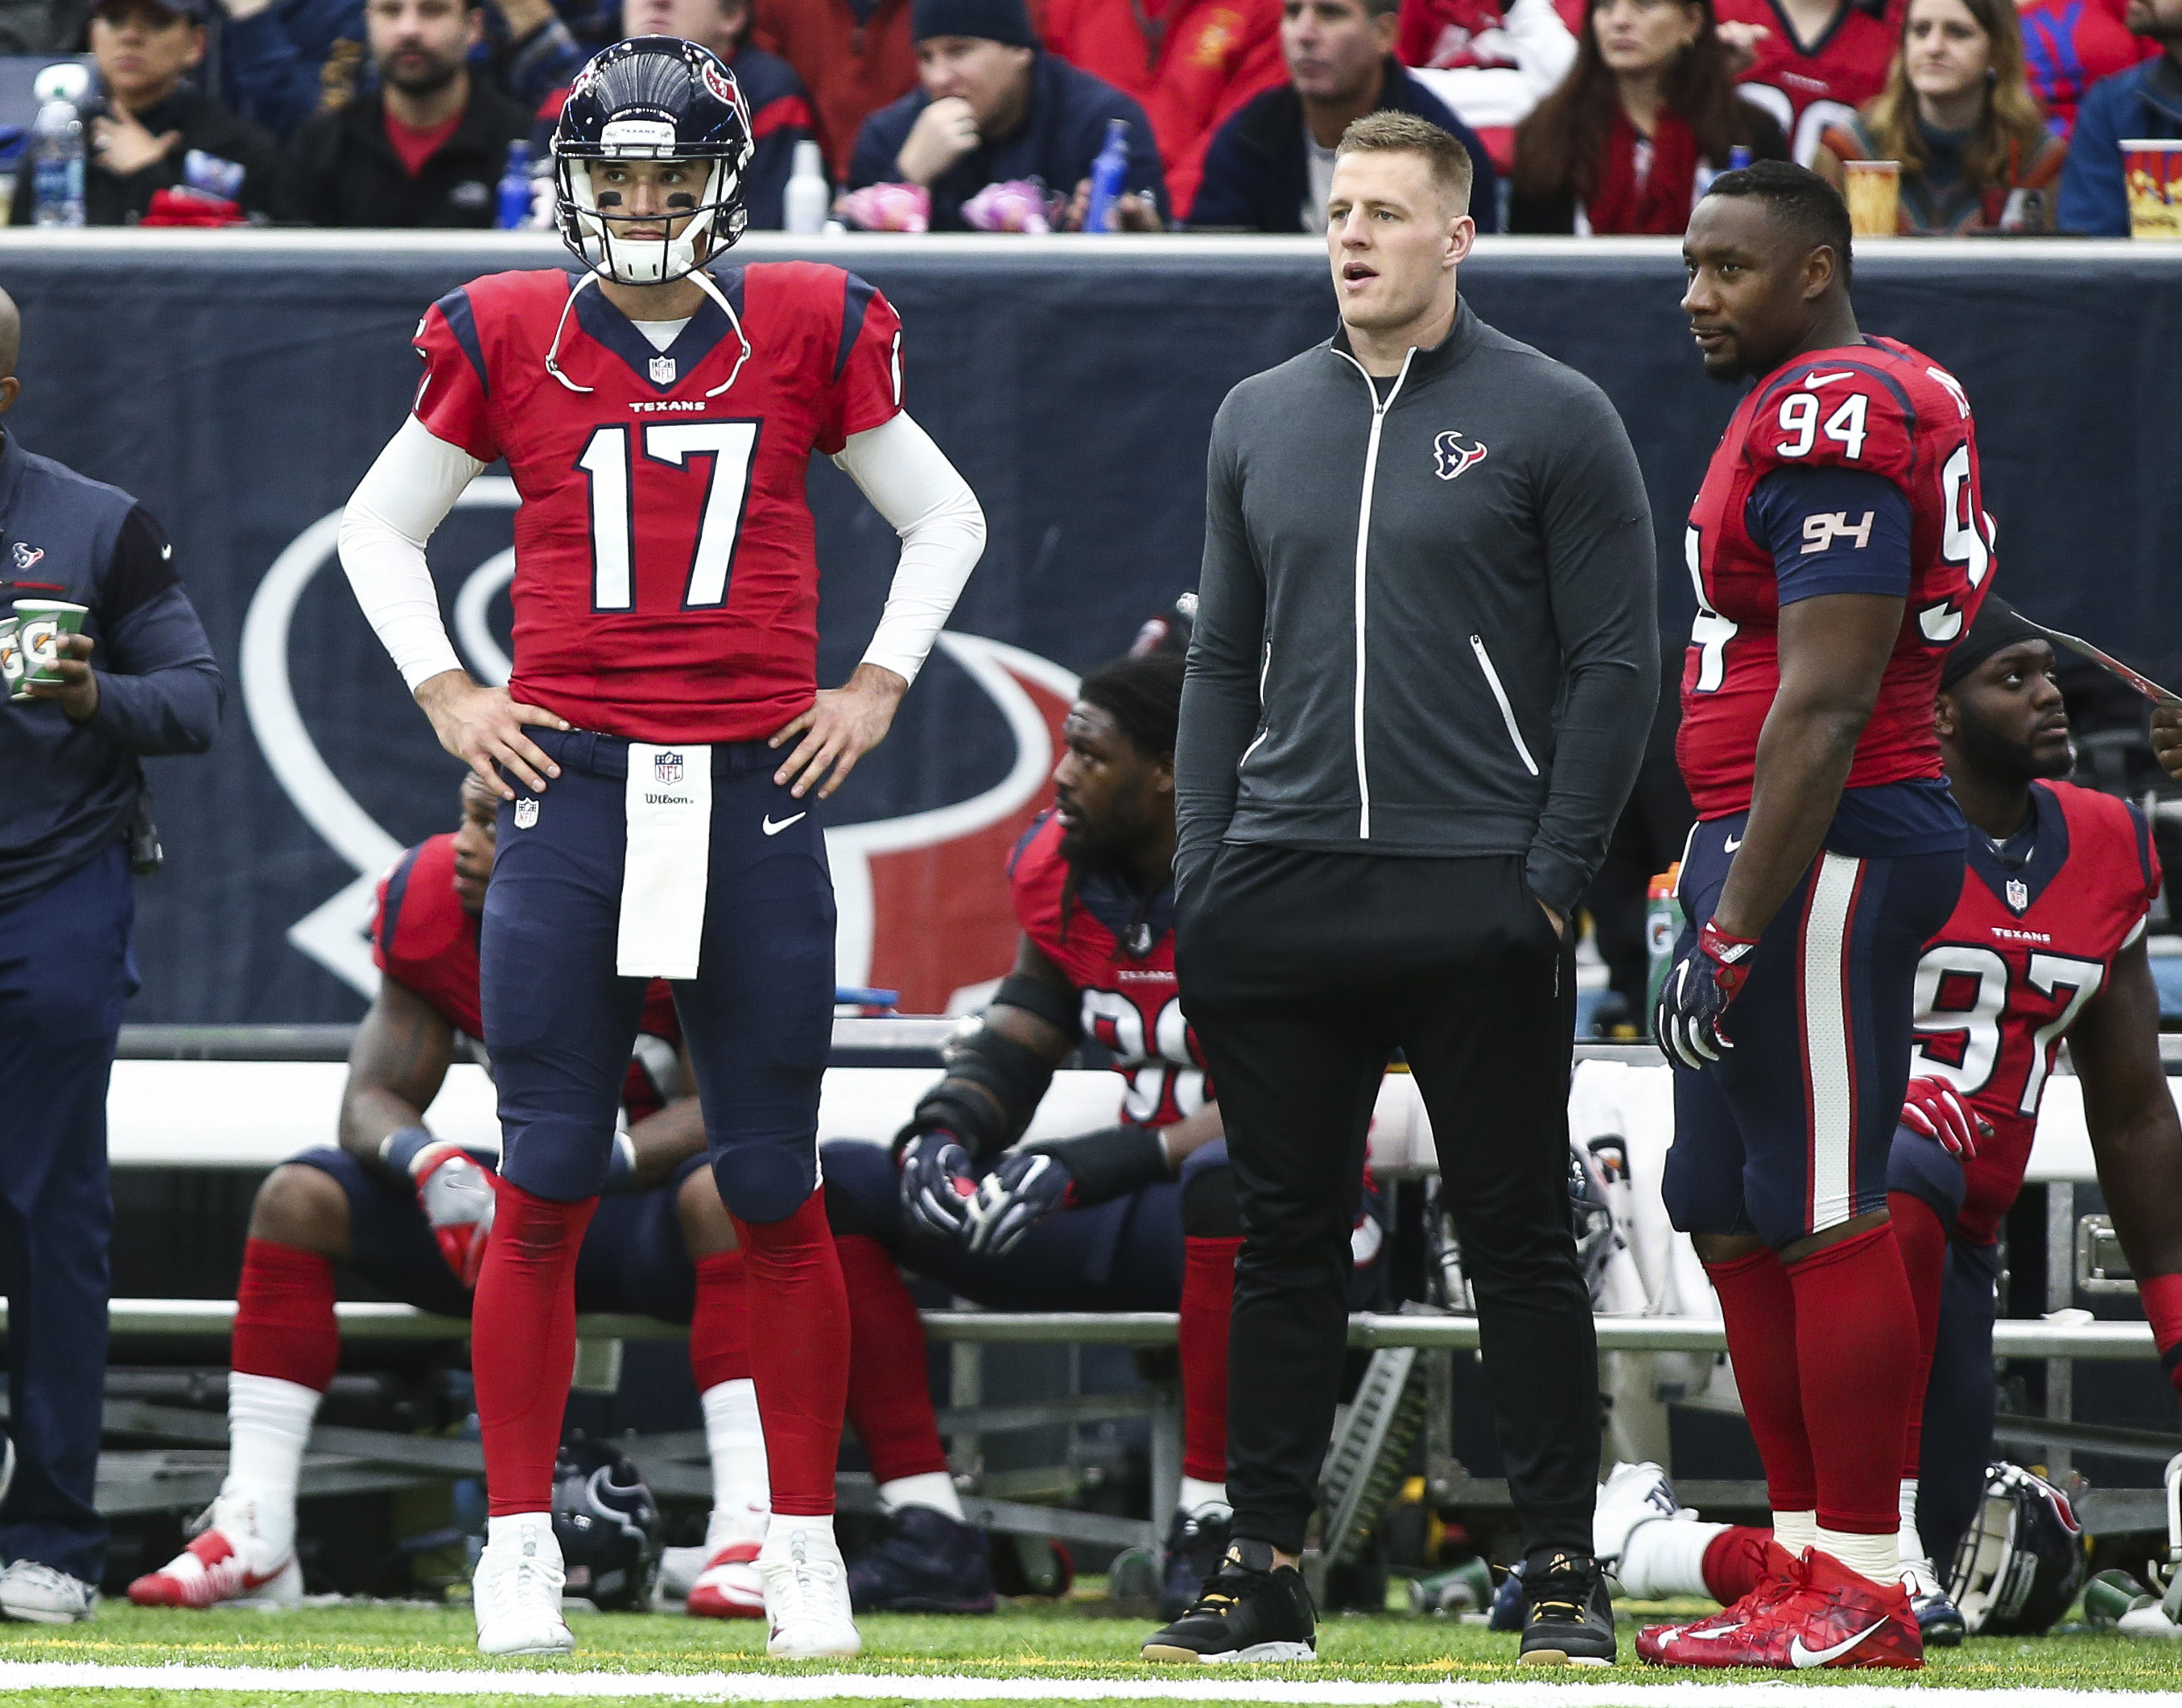 Brock Osweiler benched by Texans, replaced by Tom Savage